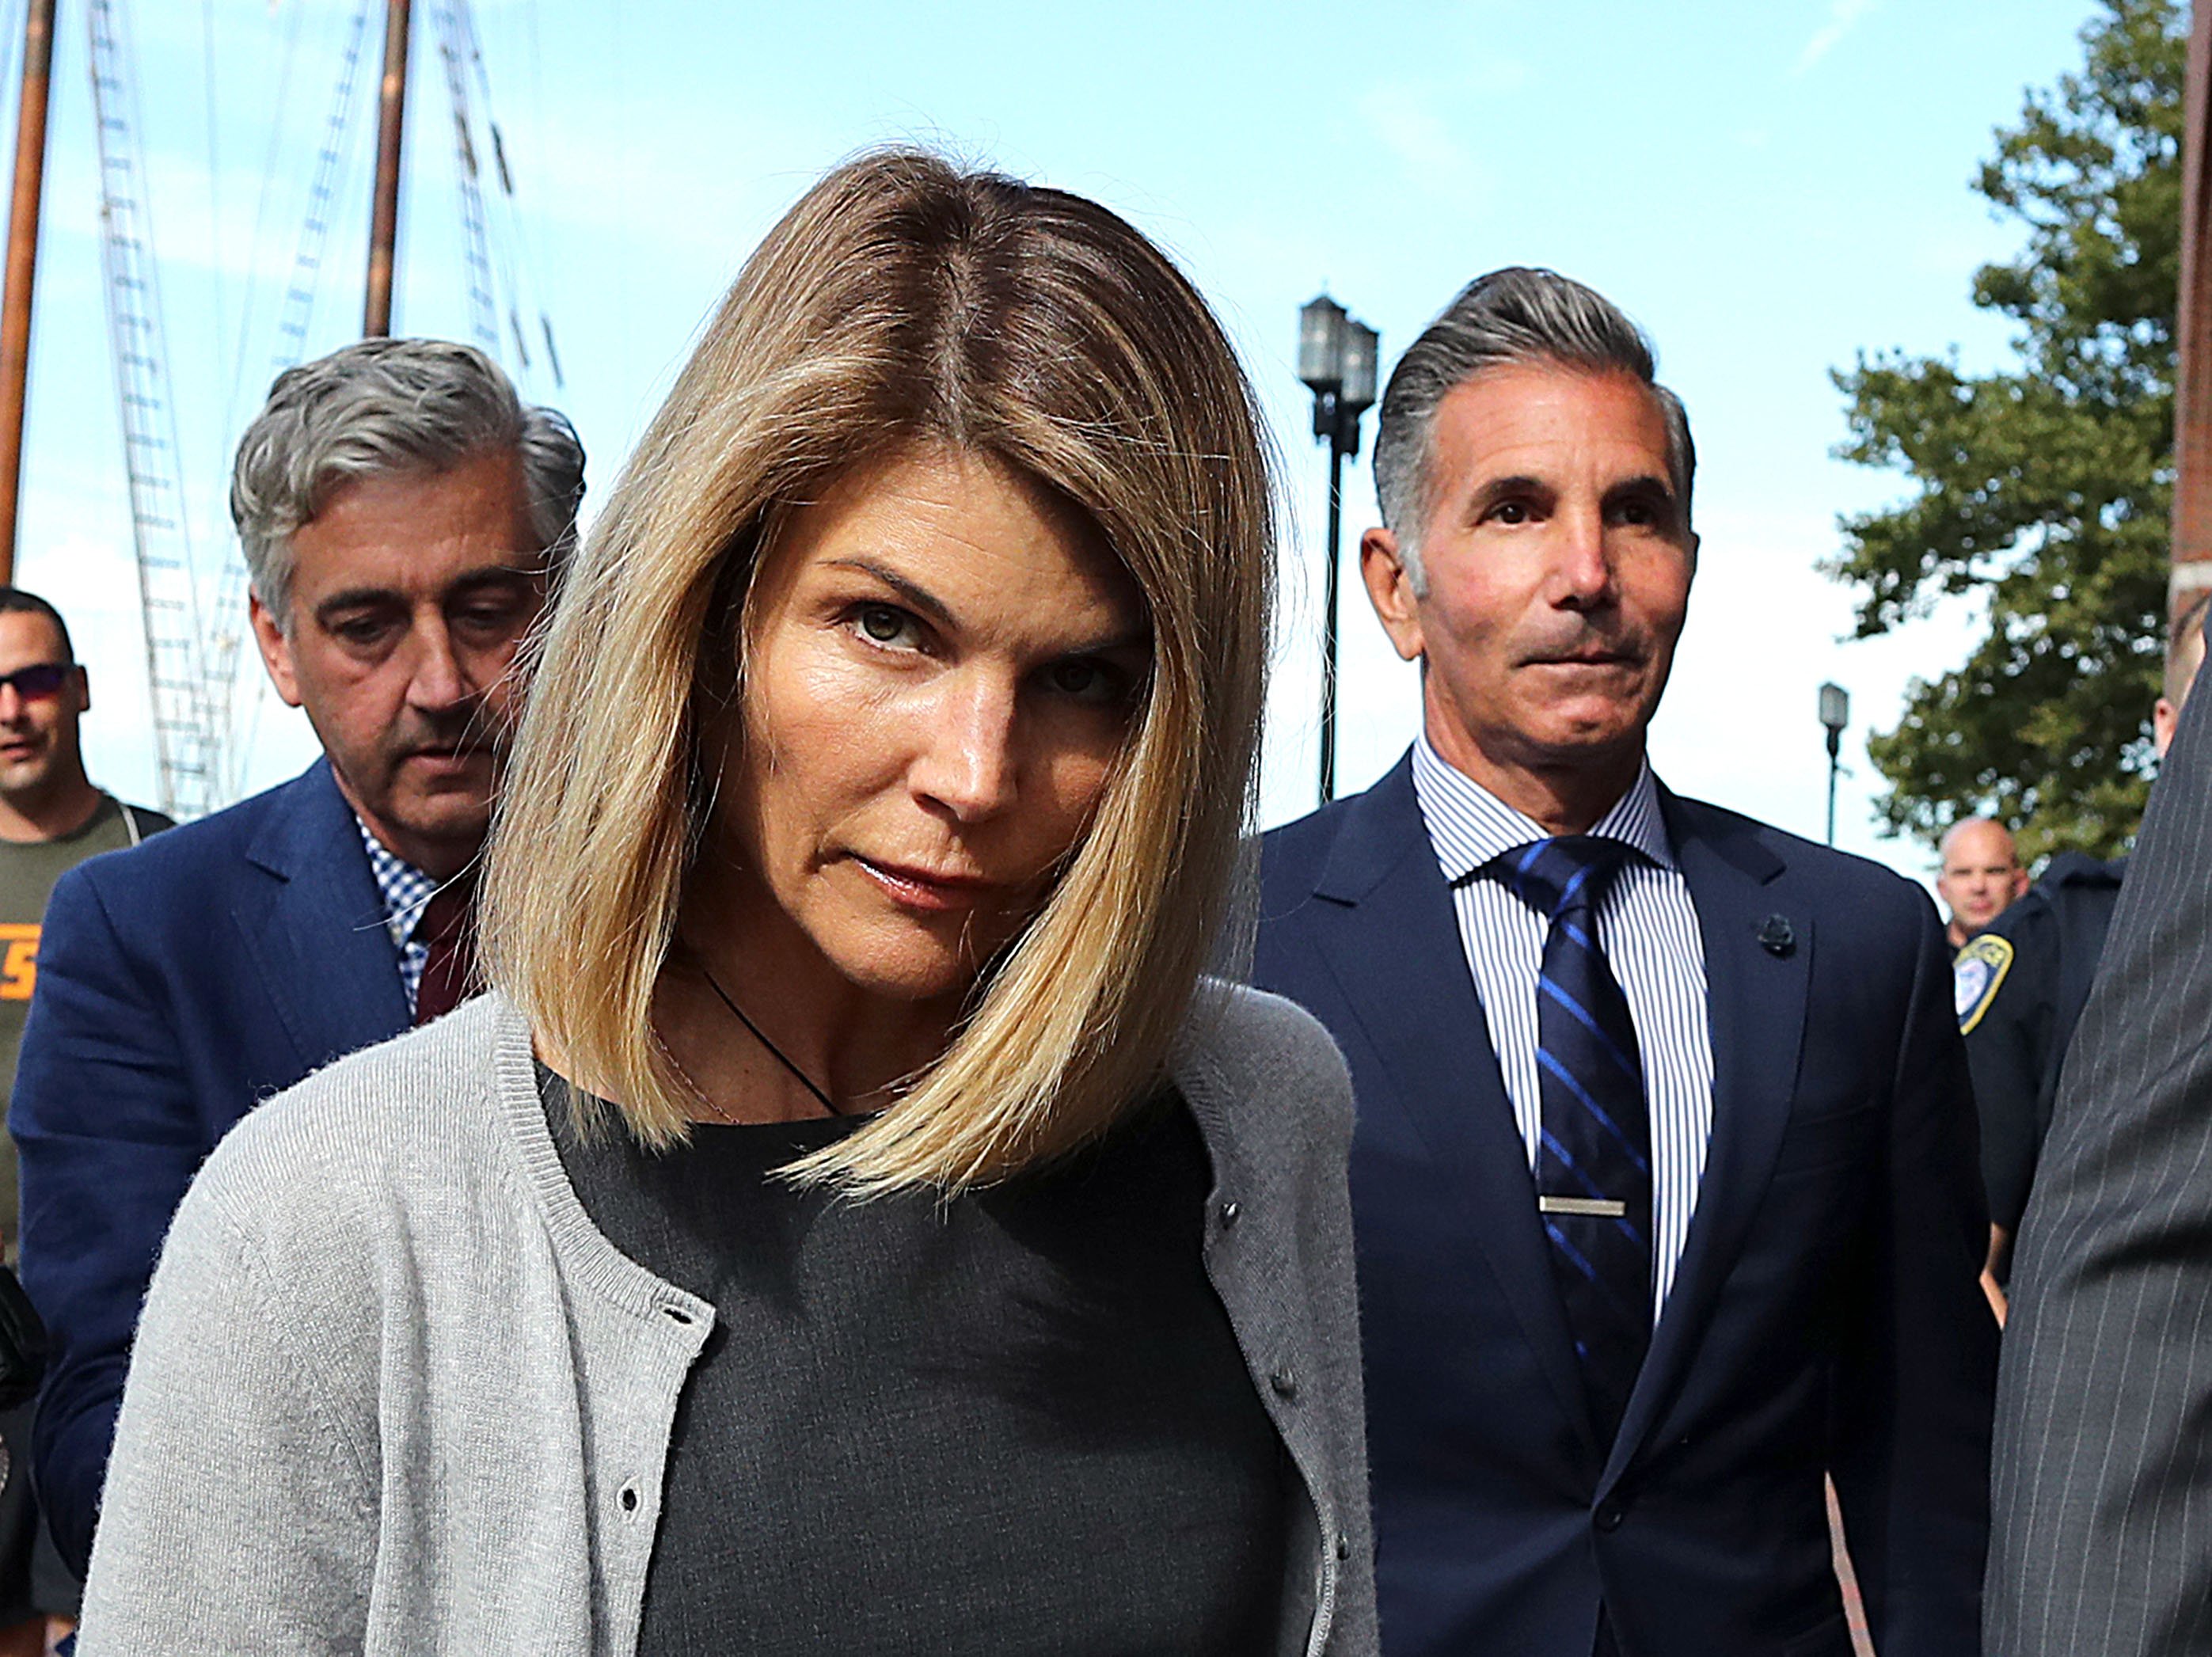 Lori Loughlin and her husband Mossimo Giannulli pictured outside the John Joseph Moakley United States Courthouse, 2019. | Photo: Getty Images